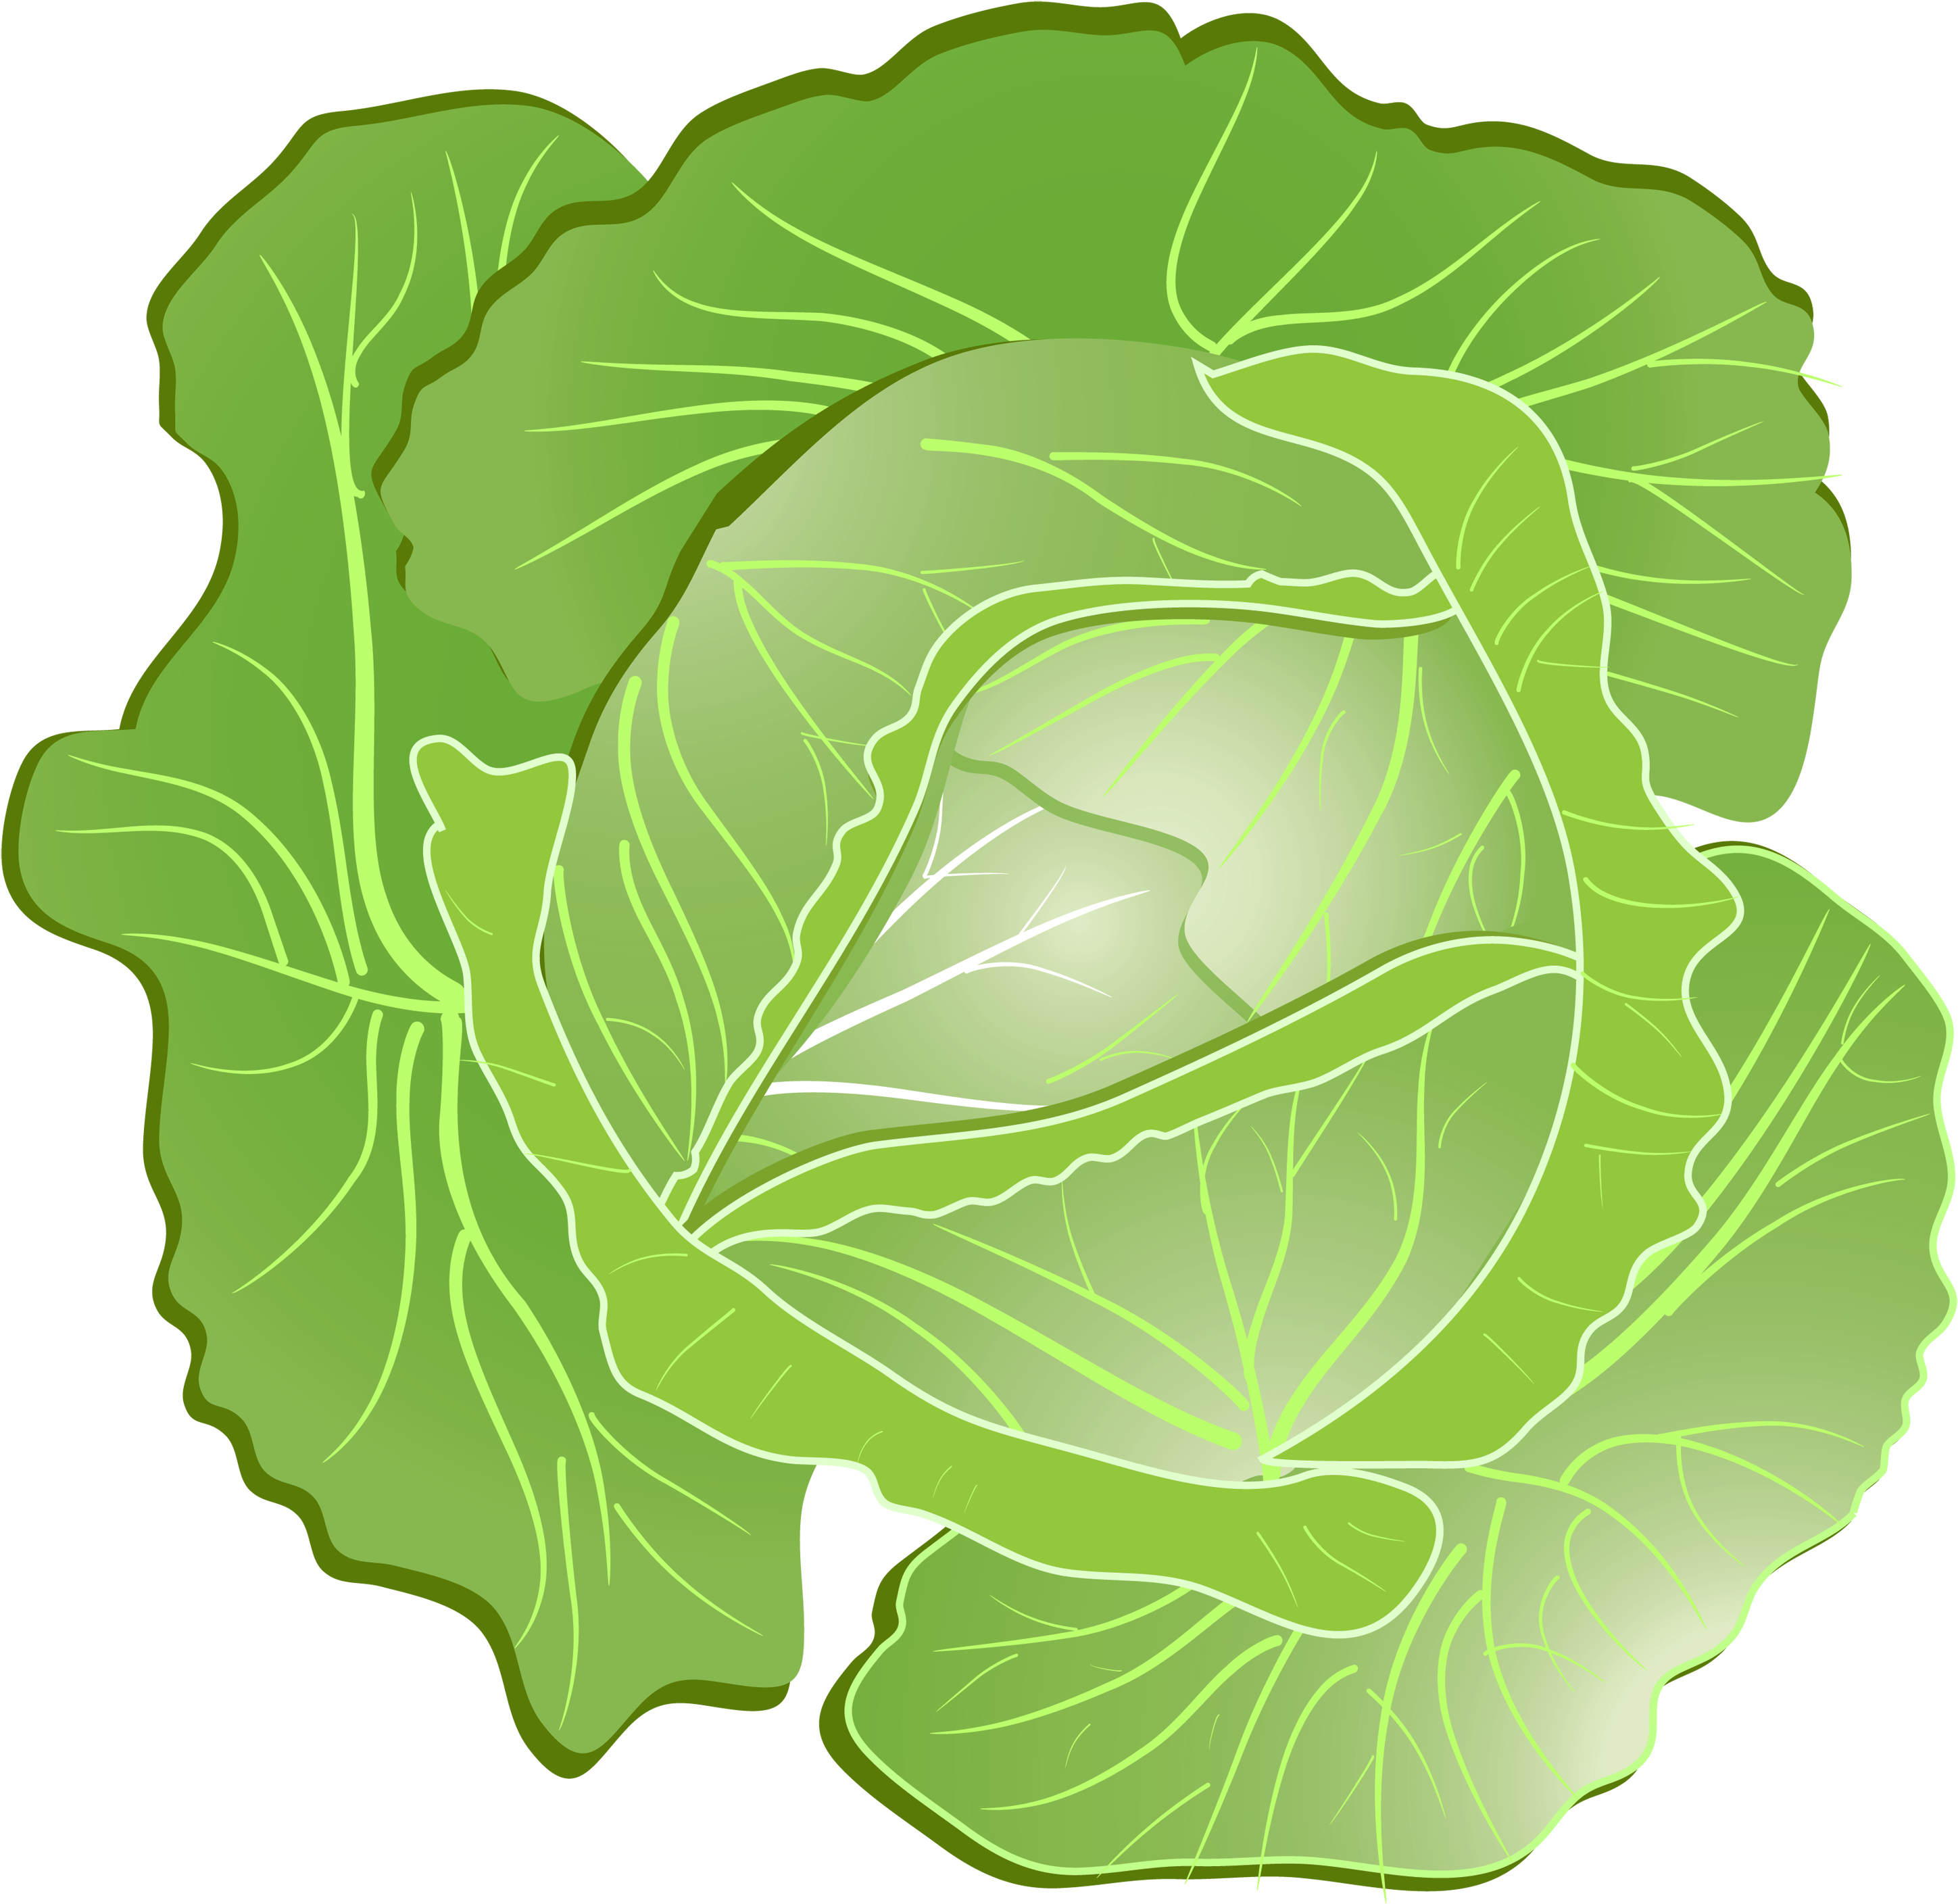 A Green Cabbage With White Edges